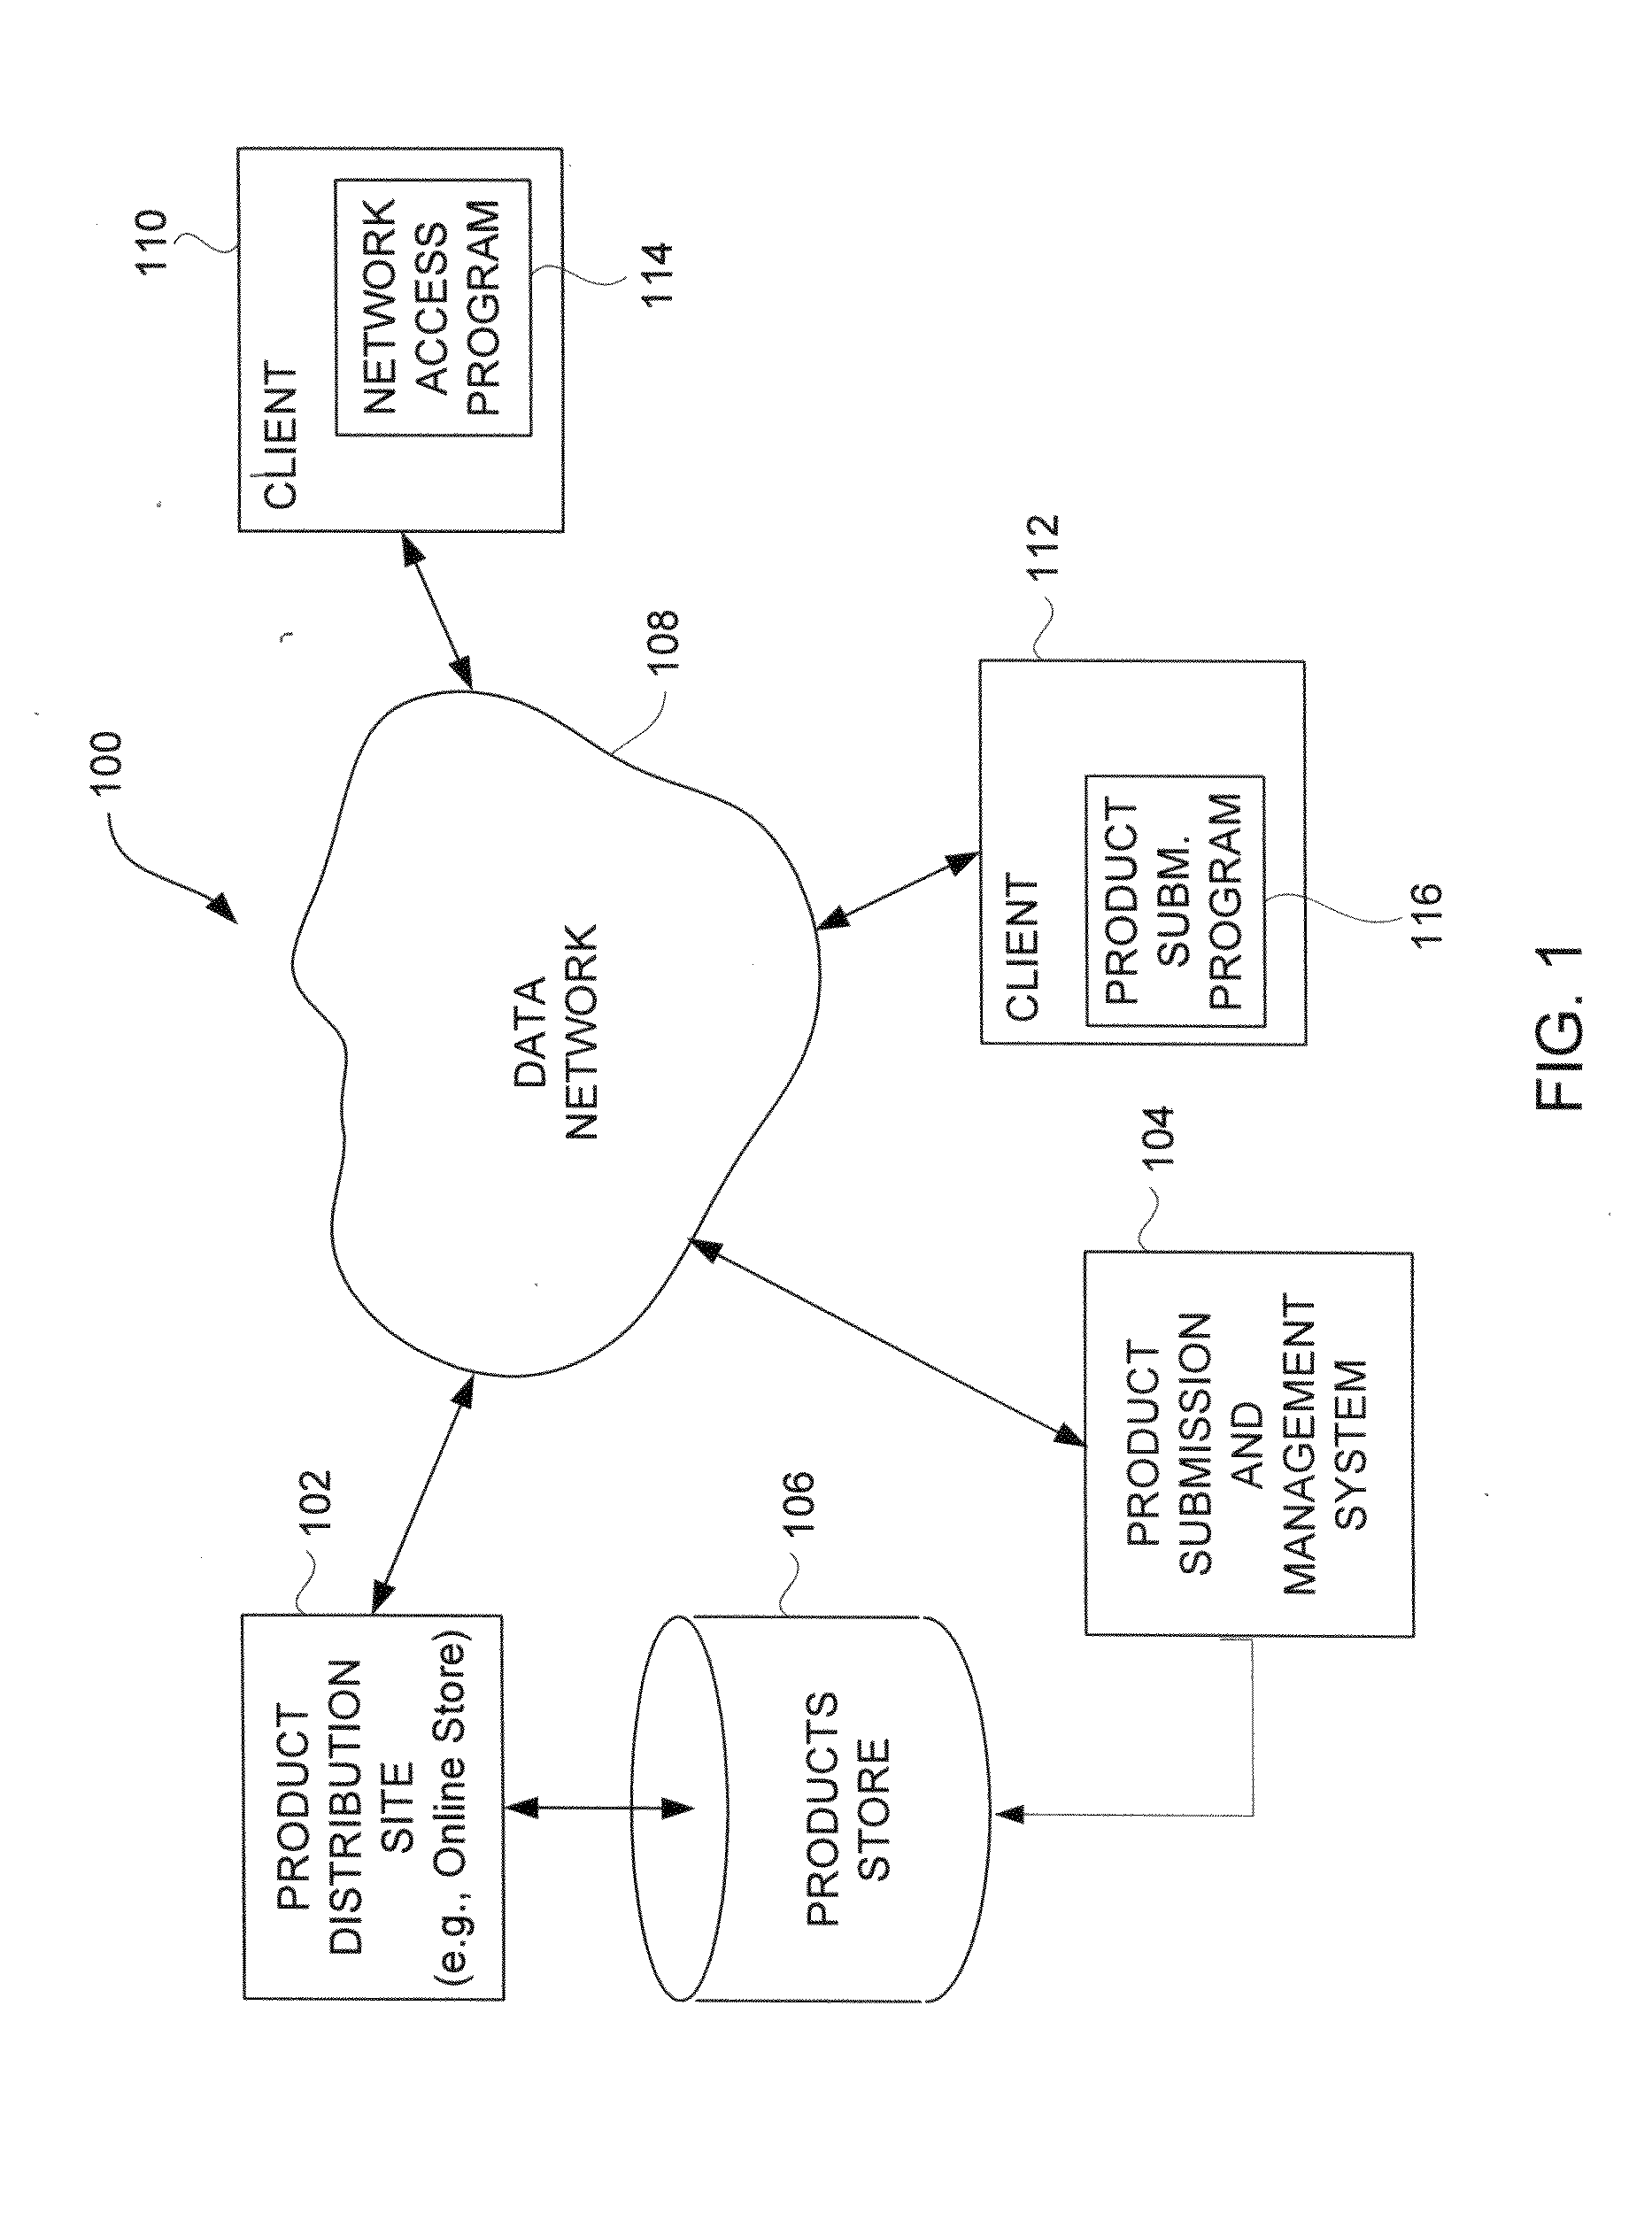 Electronic submission of application programs for network-based distribution